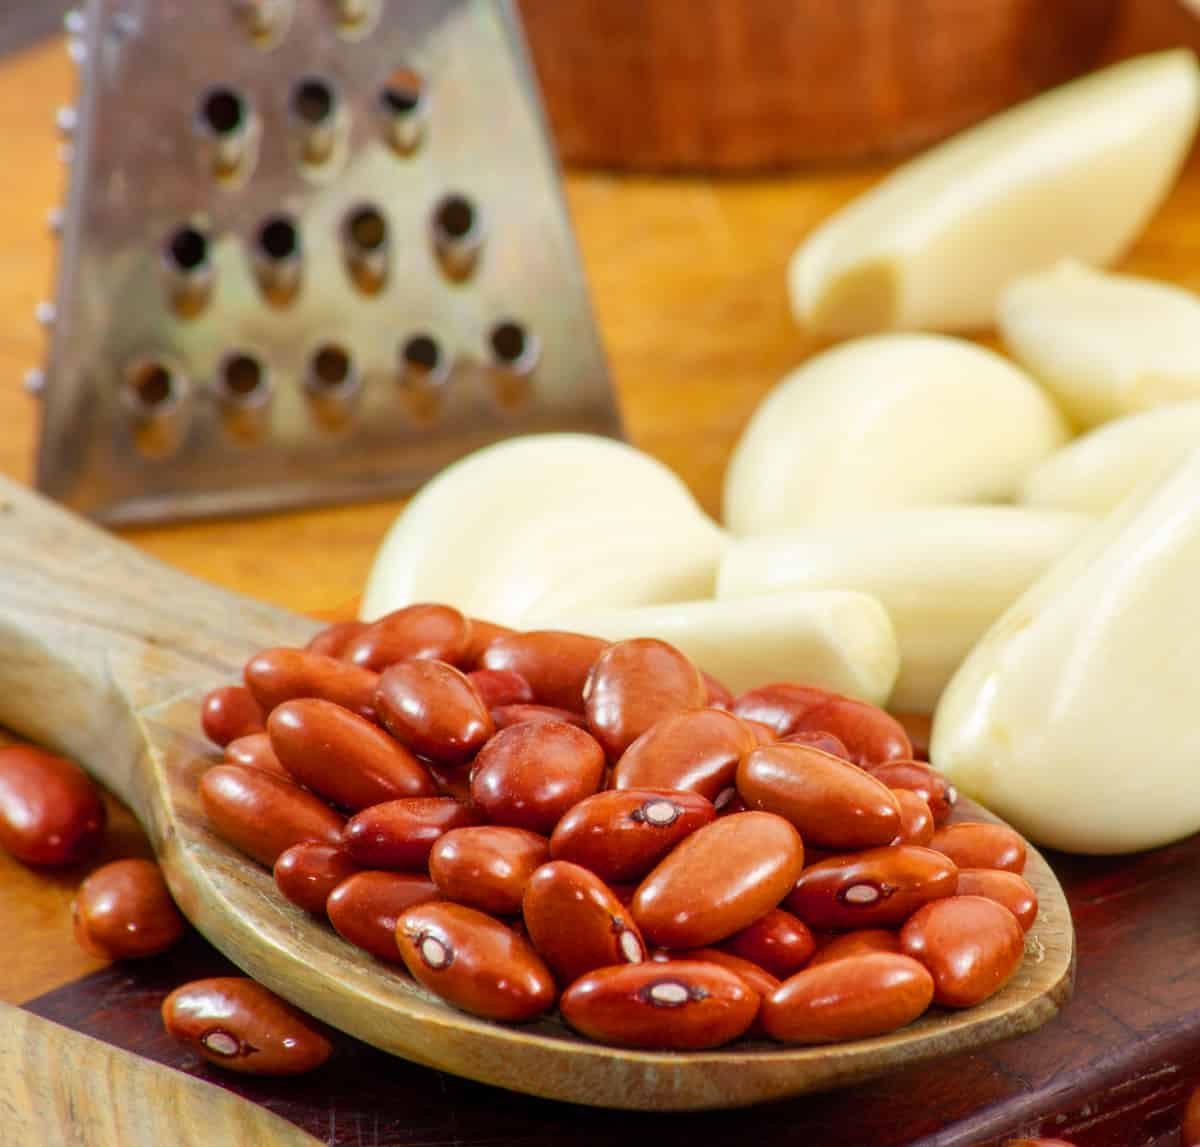 Wooden spoon with dry red beans and cloves of peeled garlic in the background.